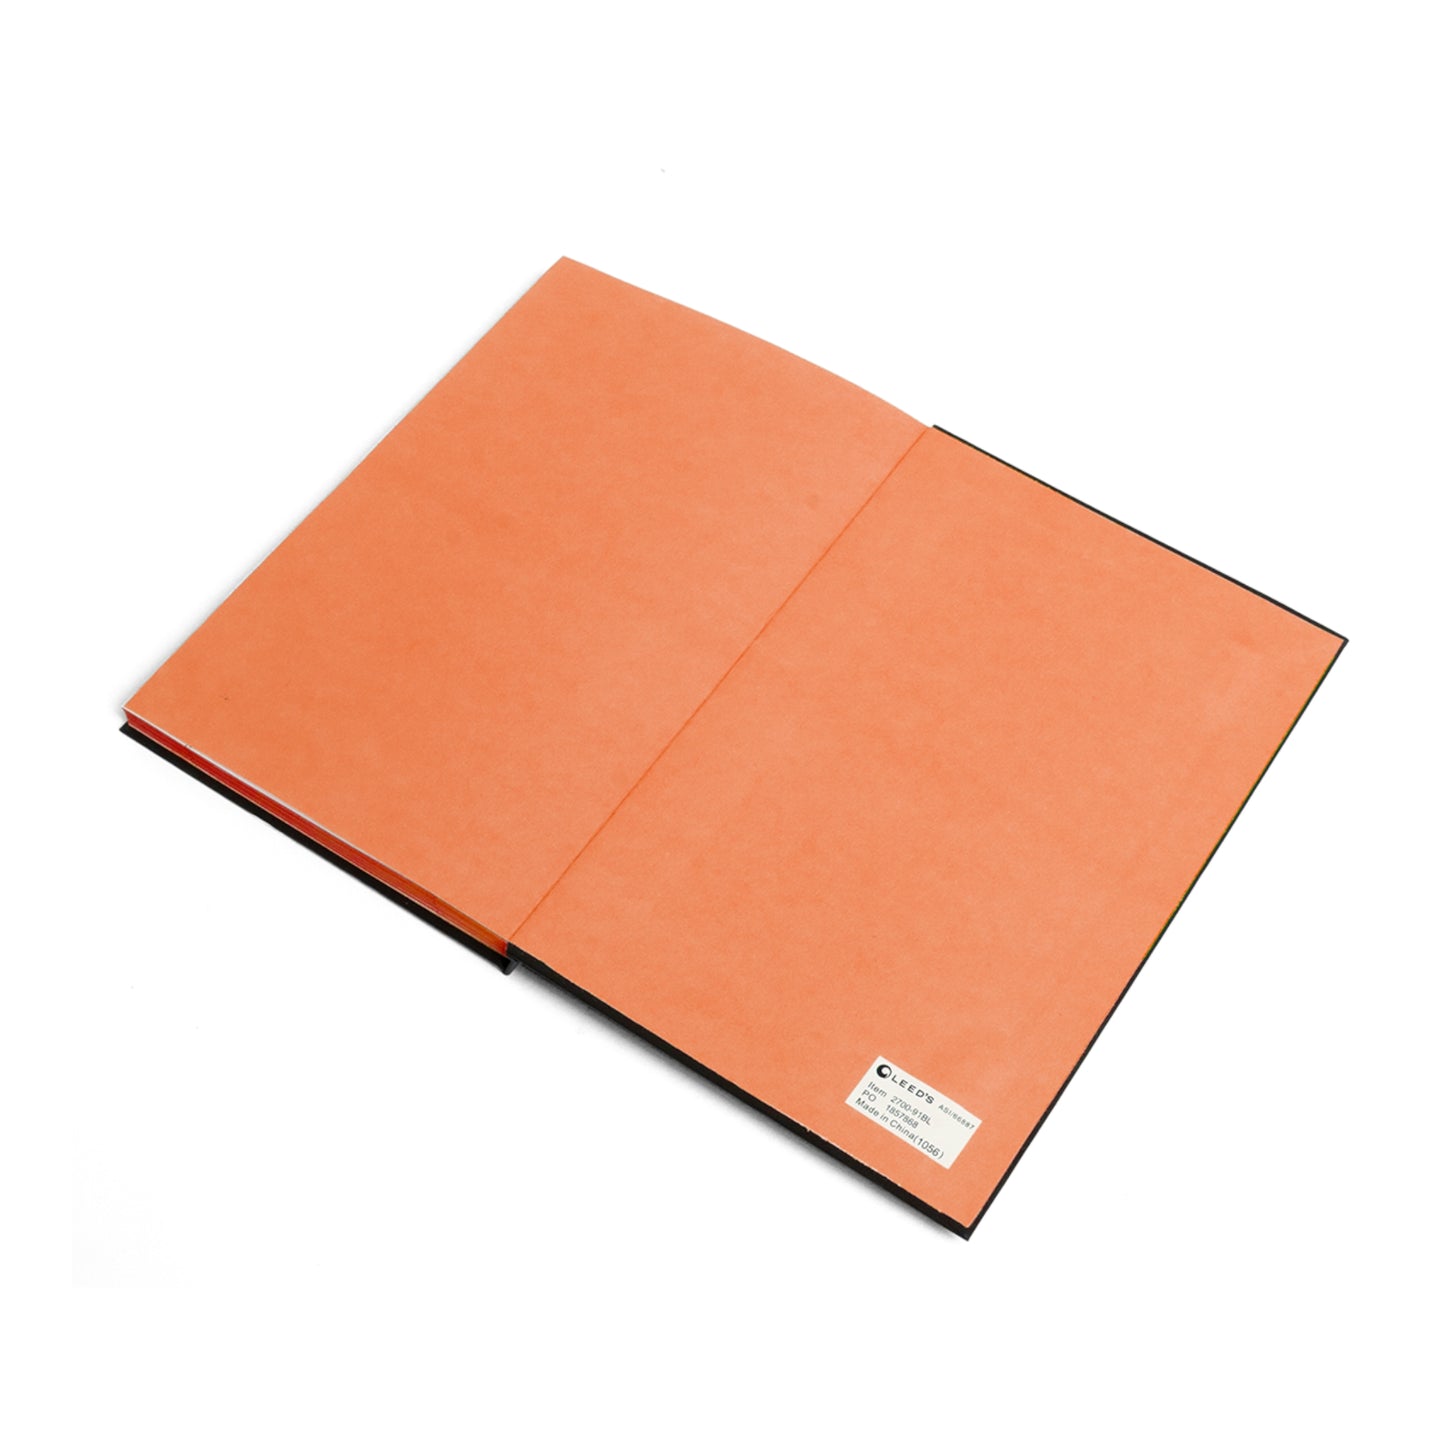 Love Letter. Contrast Notebook - Ruled